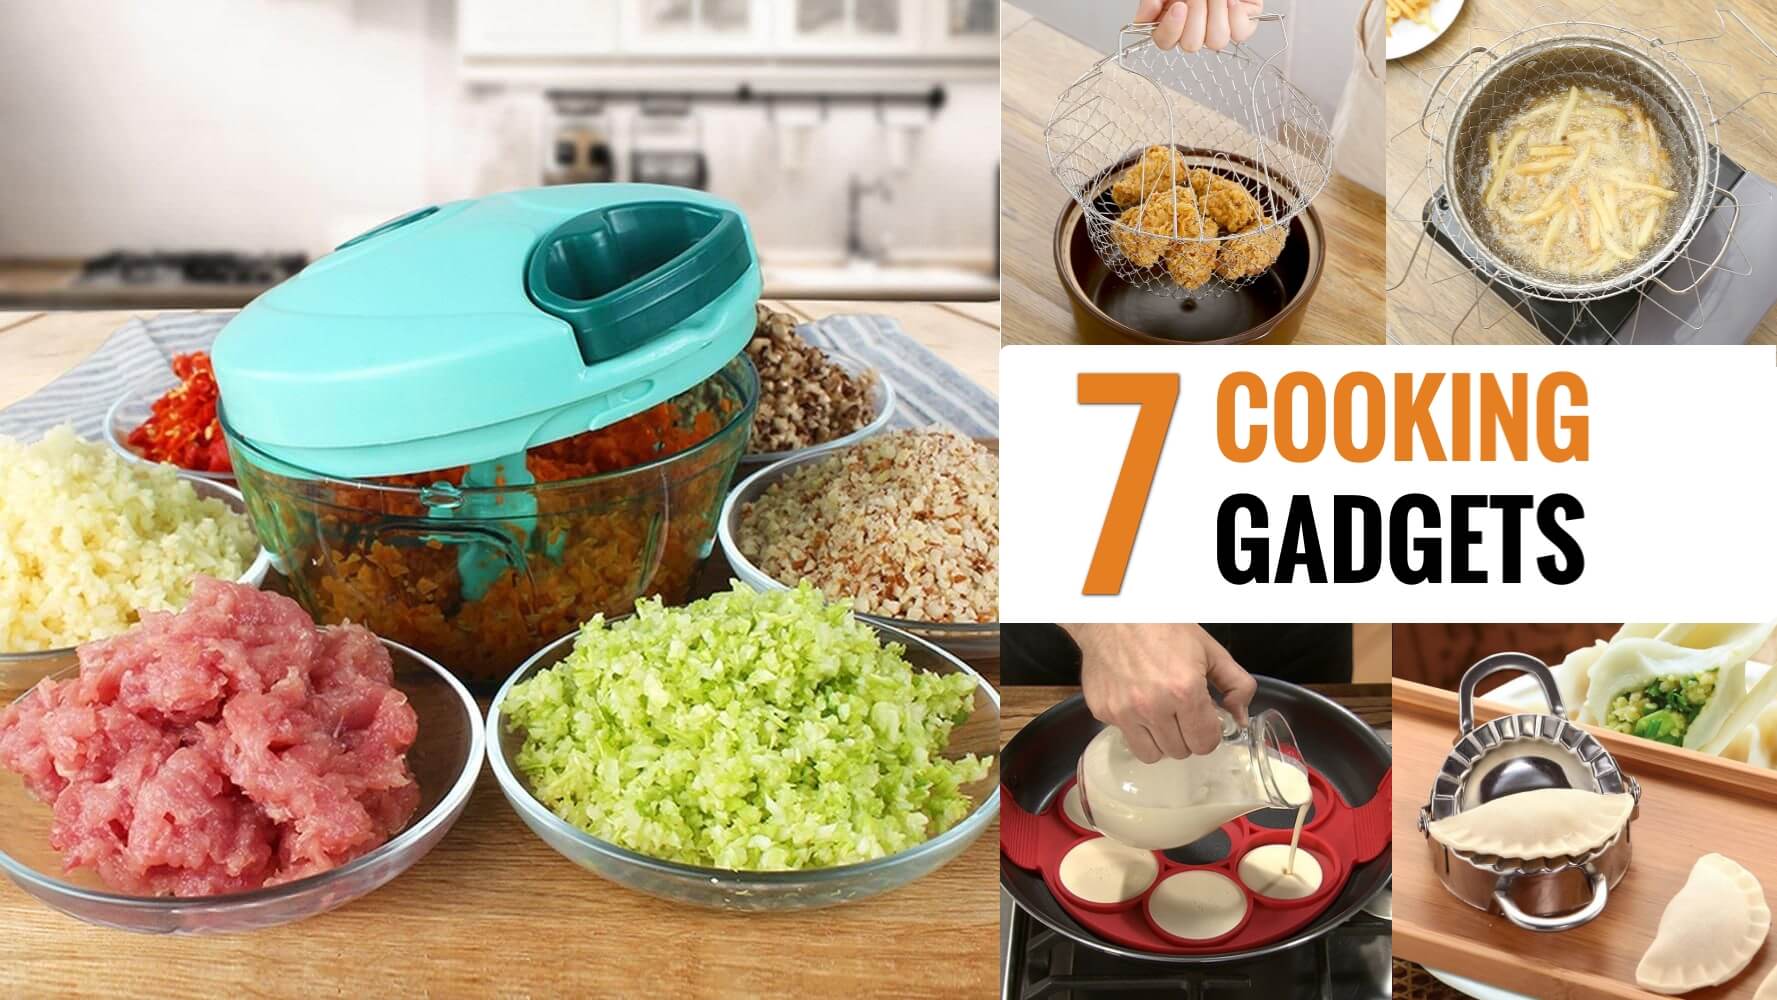 7 Cooking Gadgets that Makes Cooking Fun